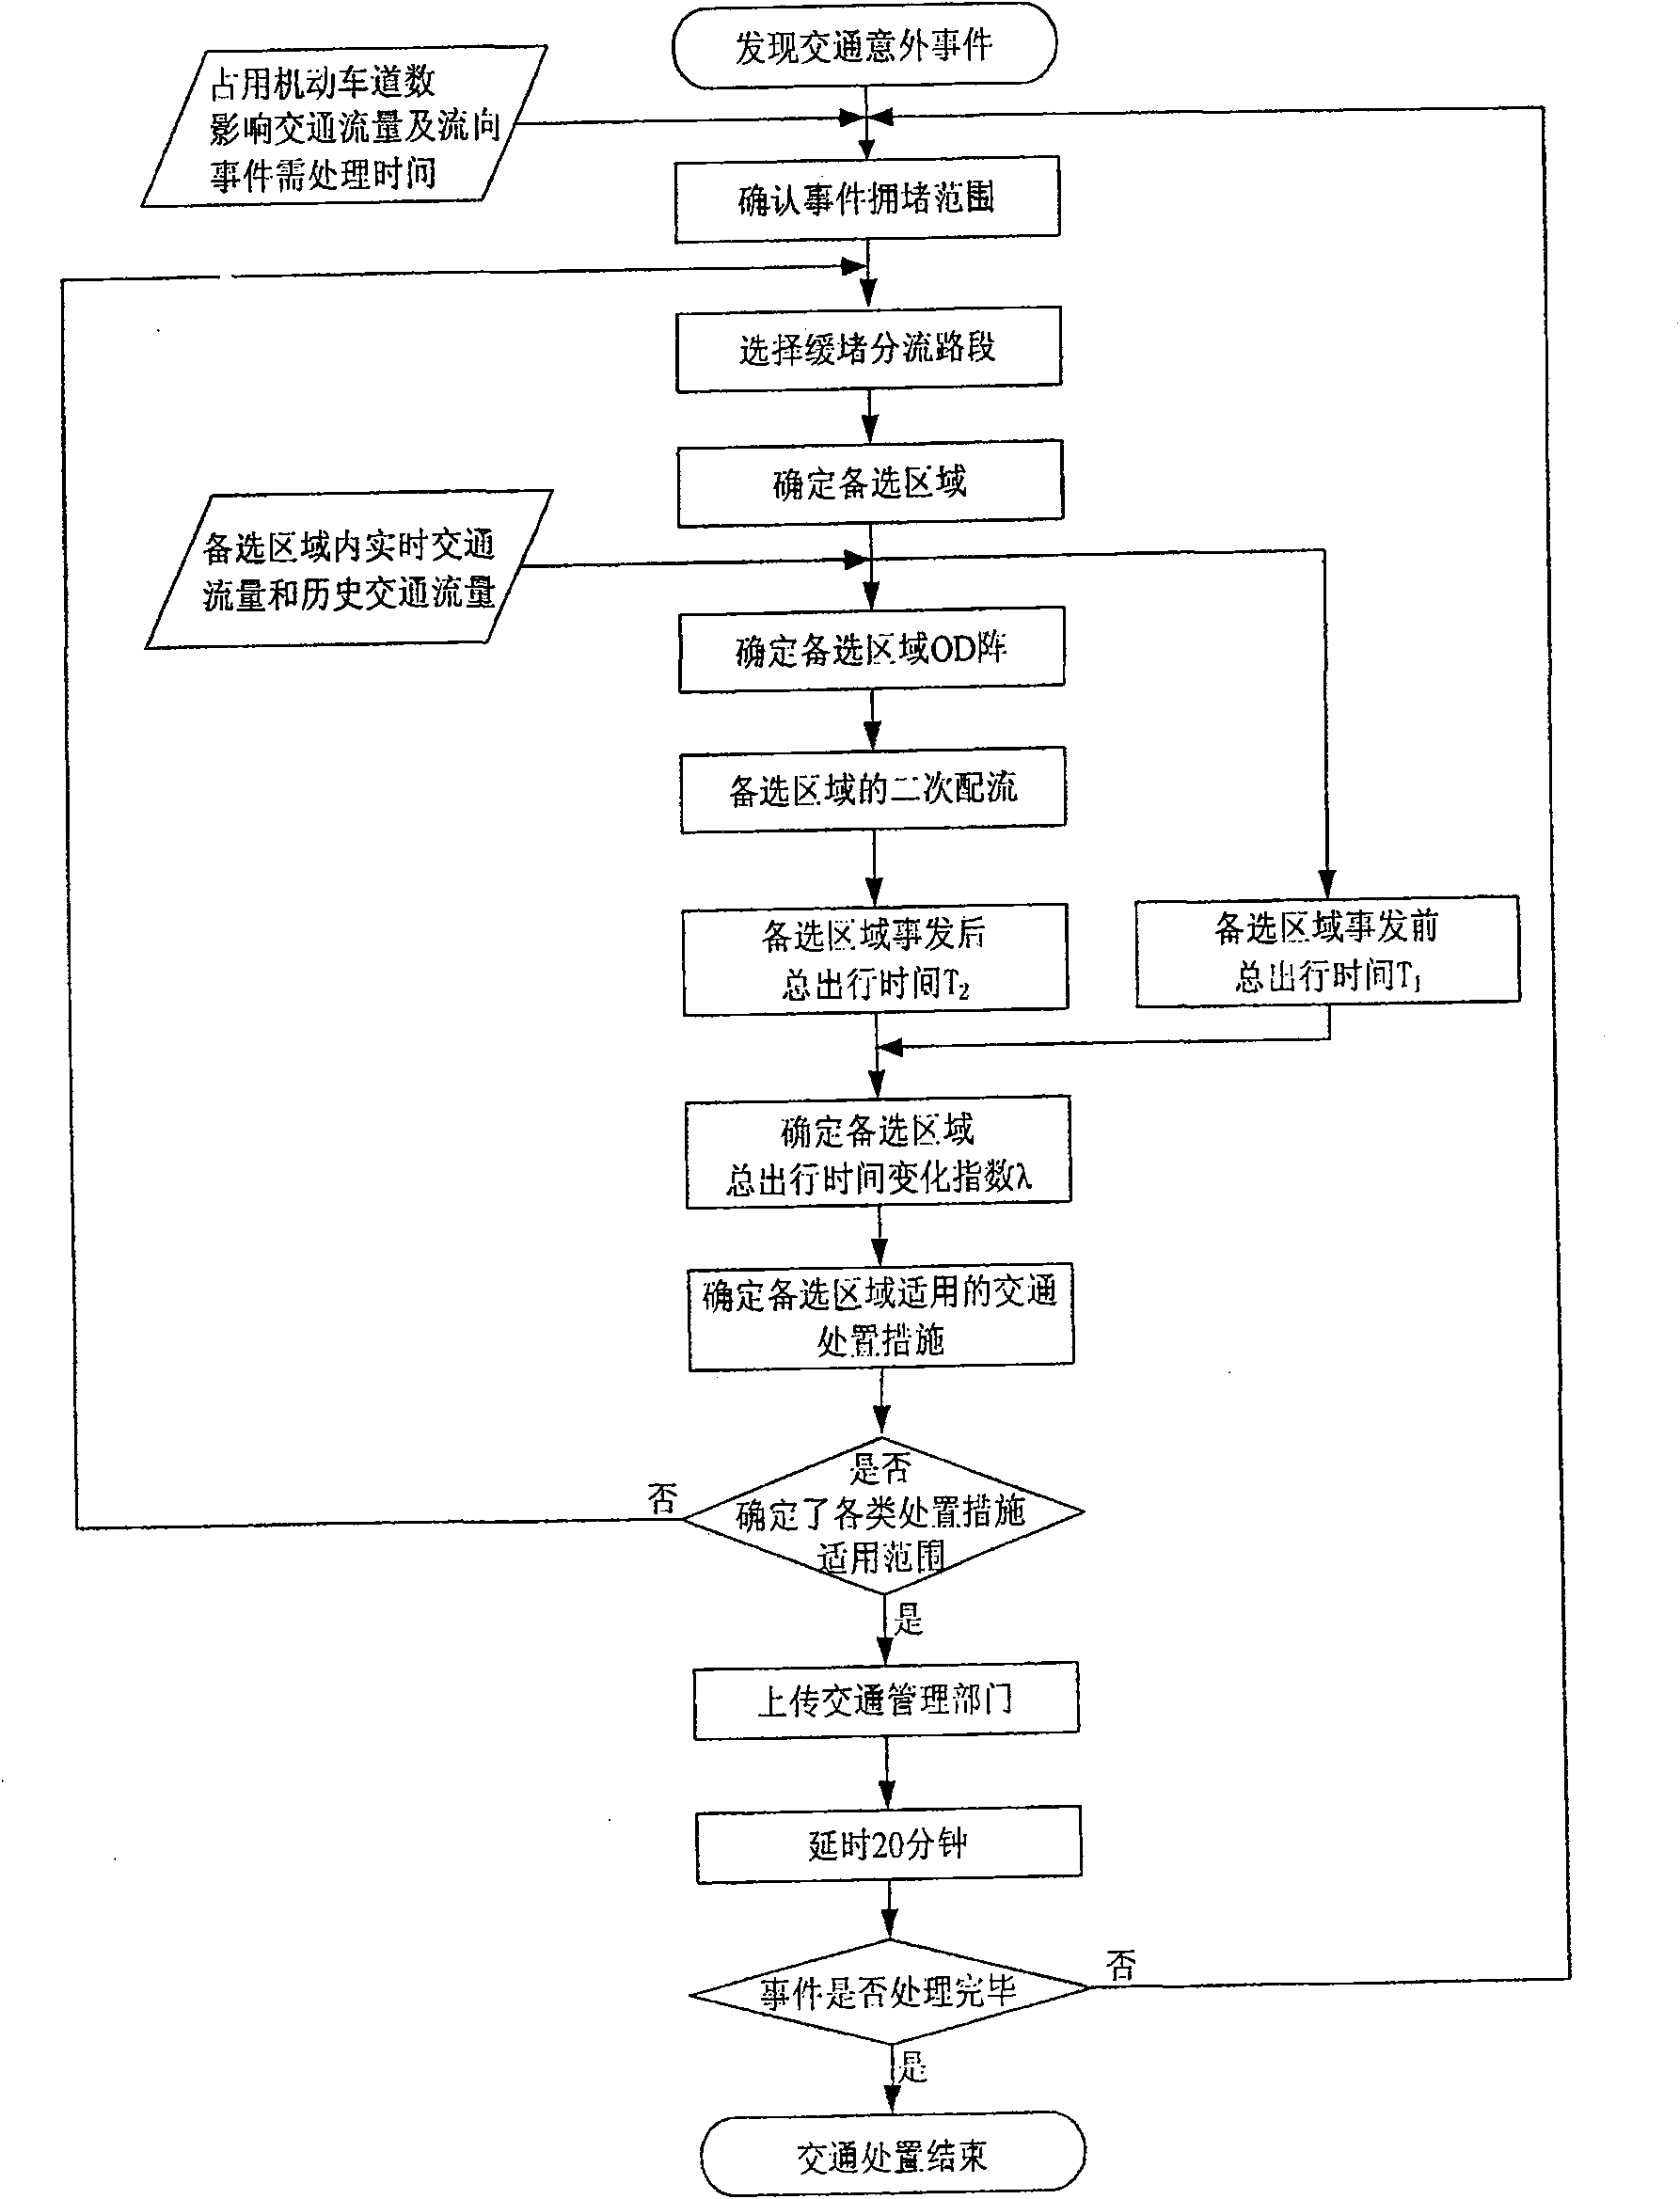 Method for acquisition and treatment of road traffic accident data